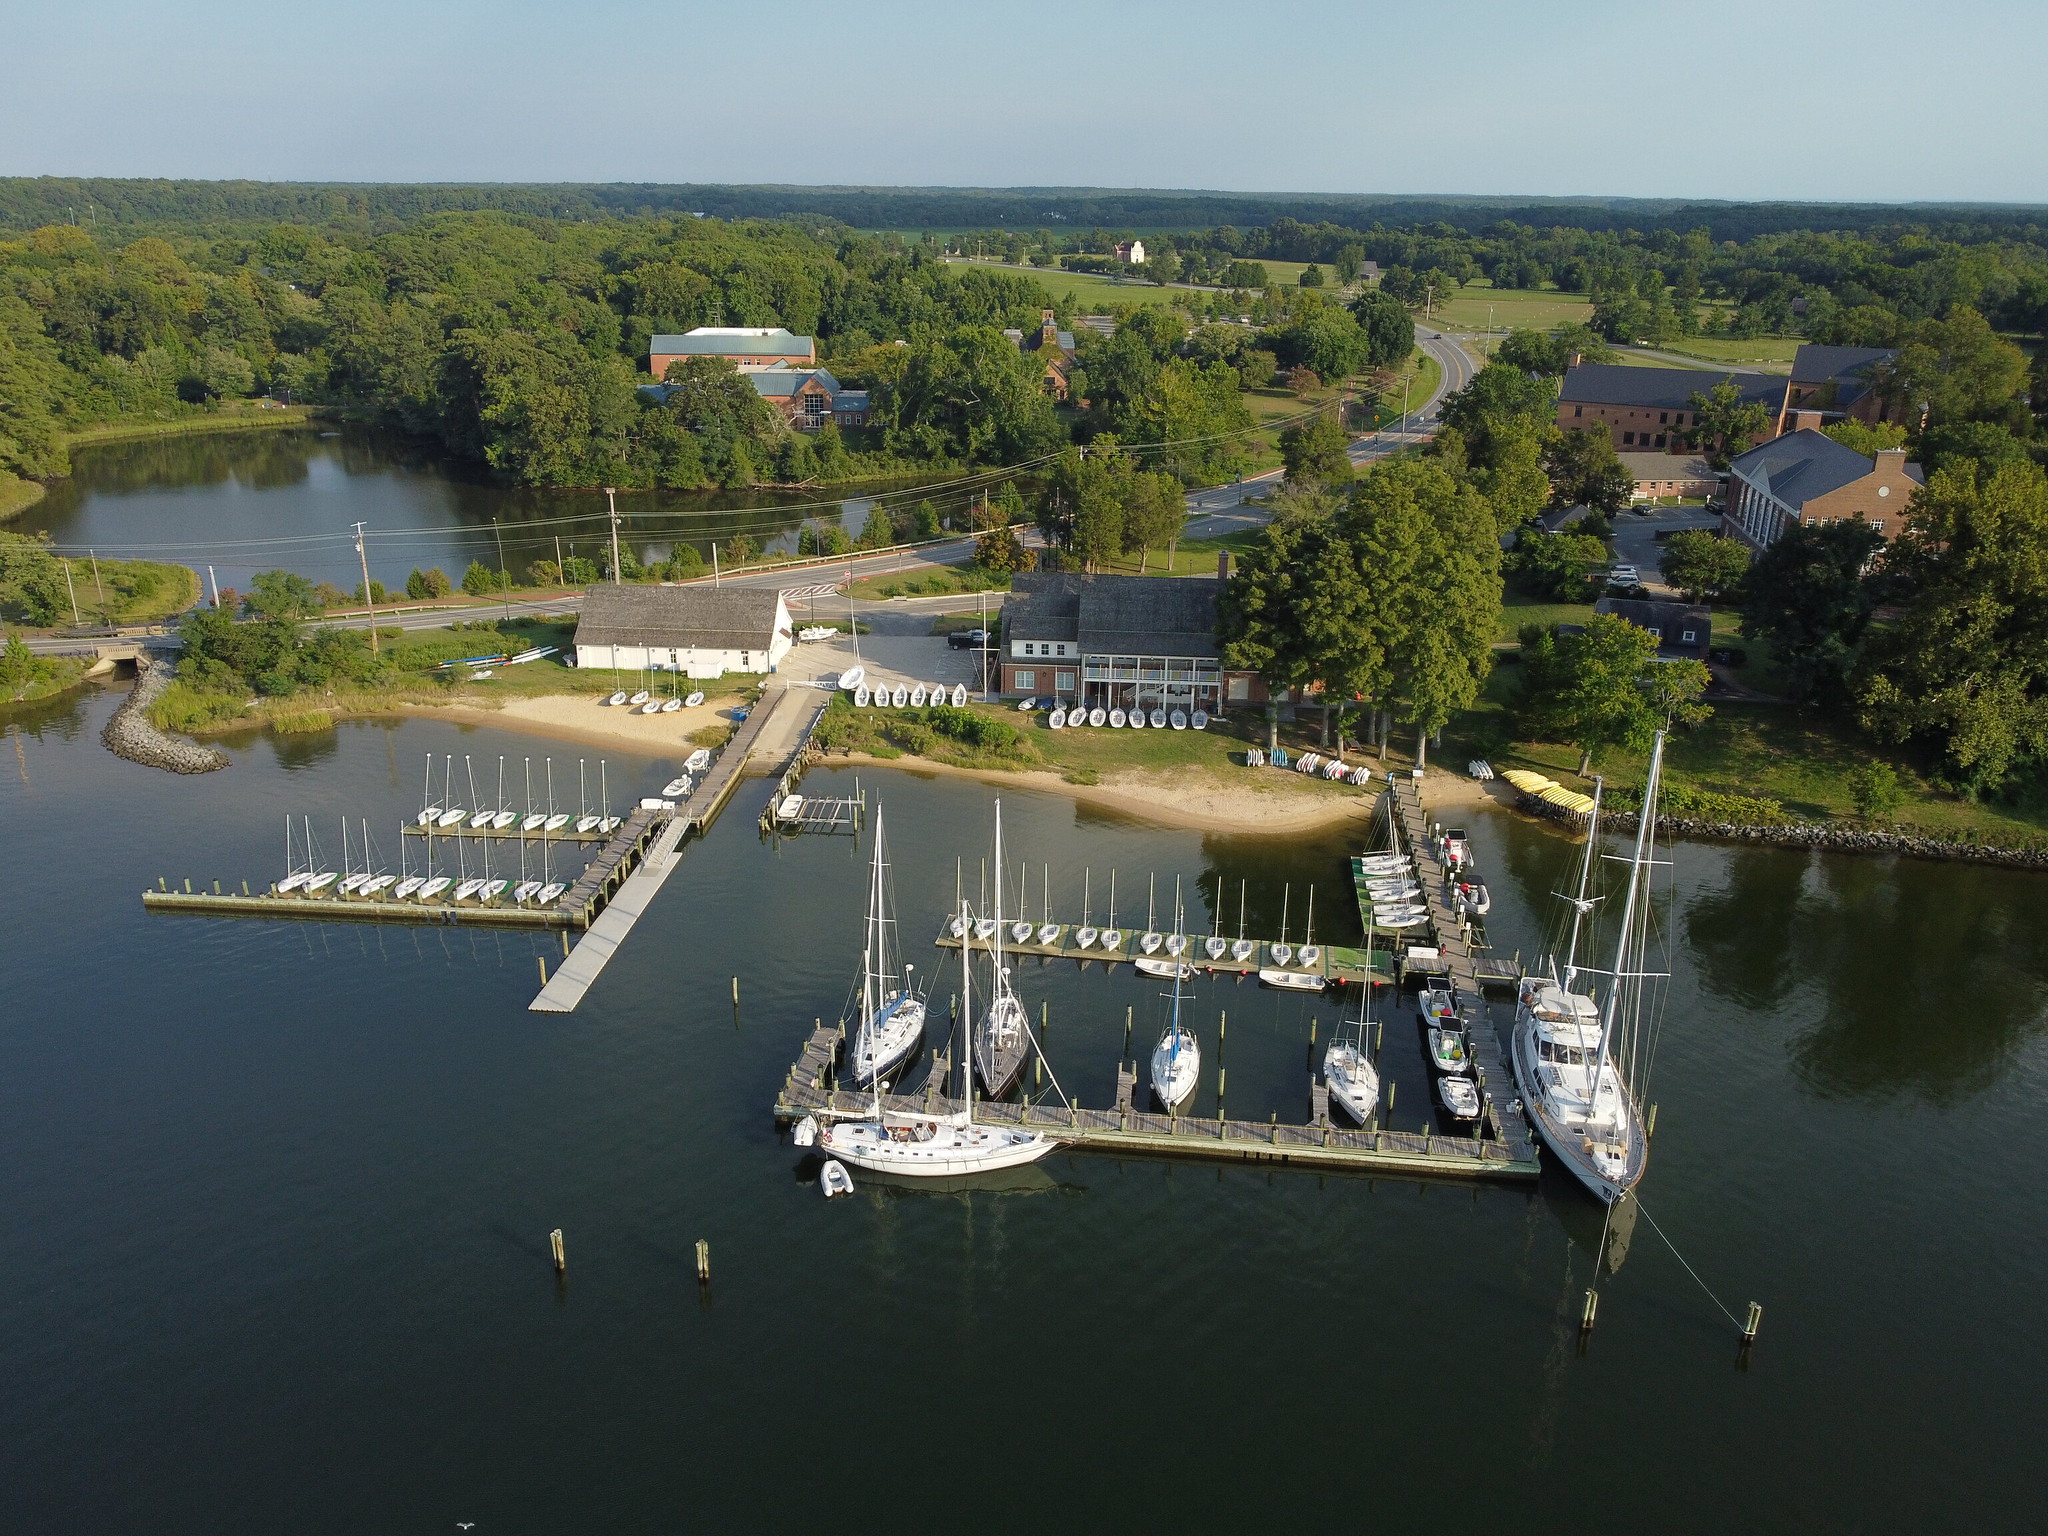 Aerial Shot of St. Mary's College of Maryland on the St. Mary's River Waterfront with boats in the river